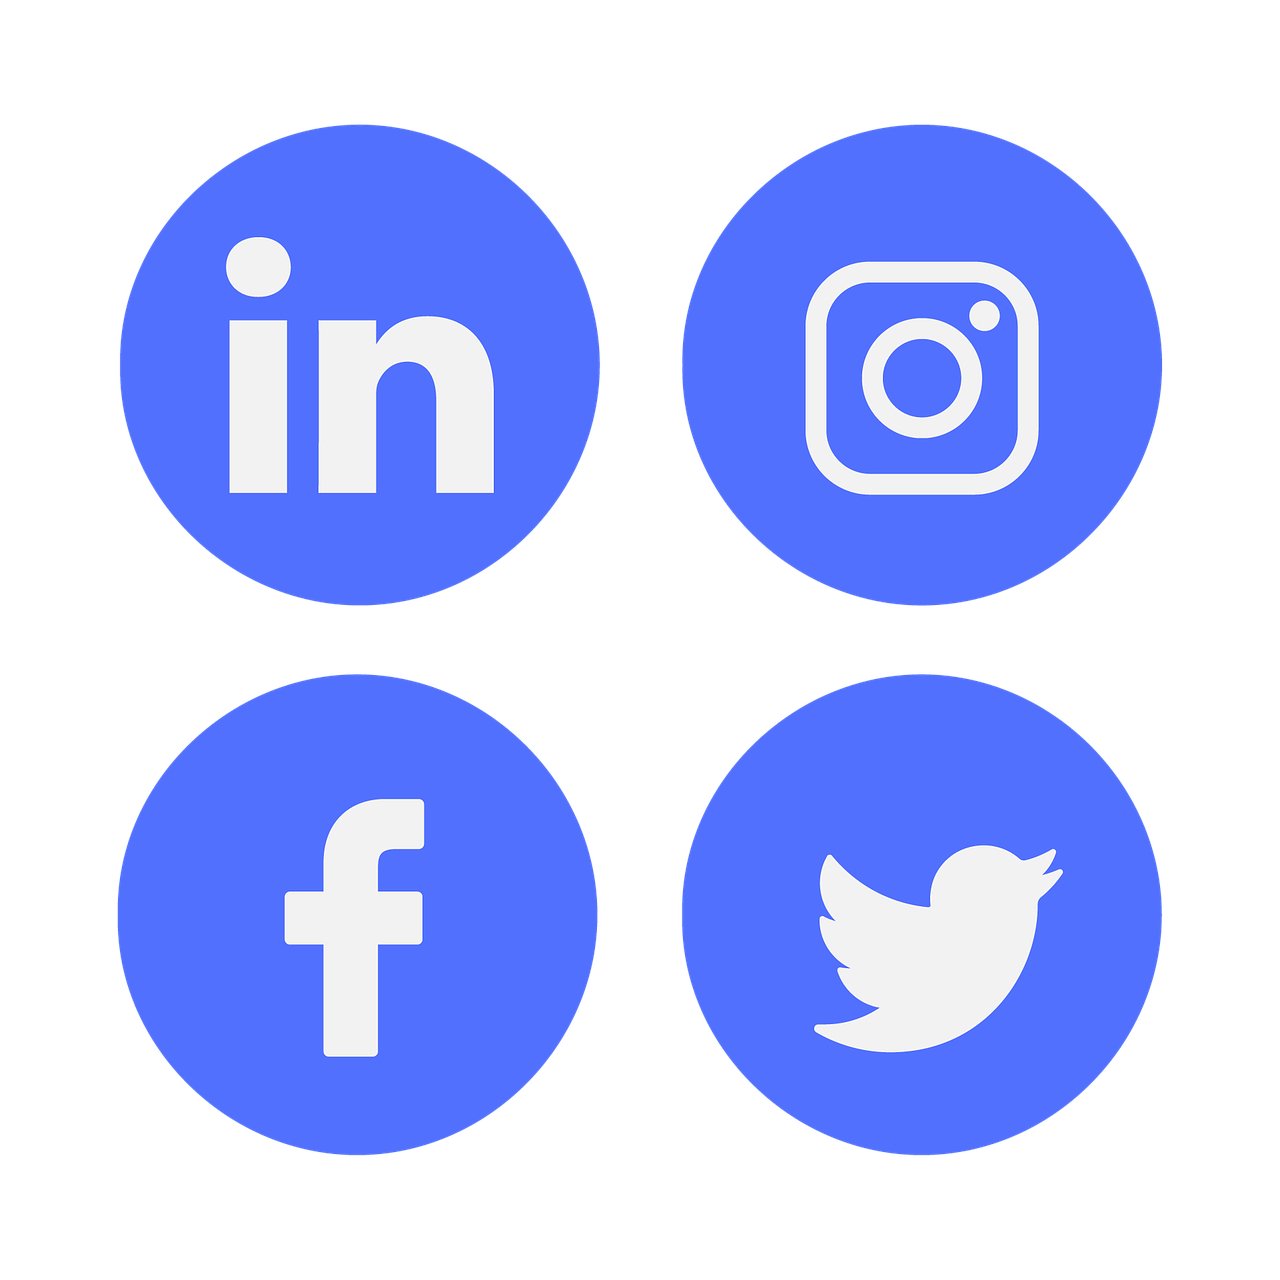 Image shows icons of multiple social media channels